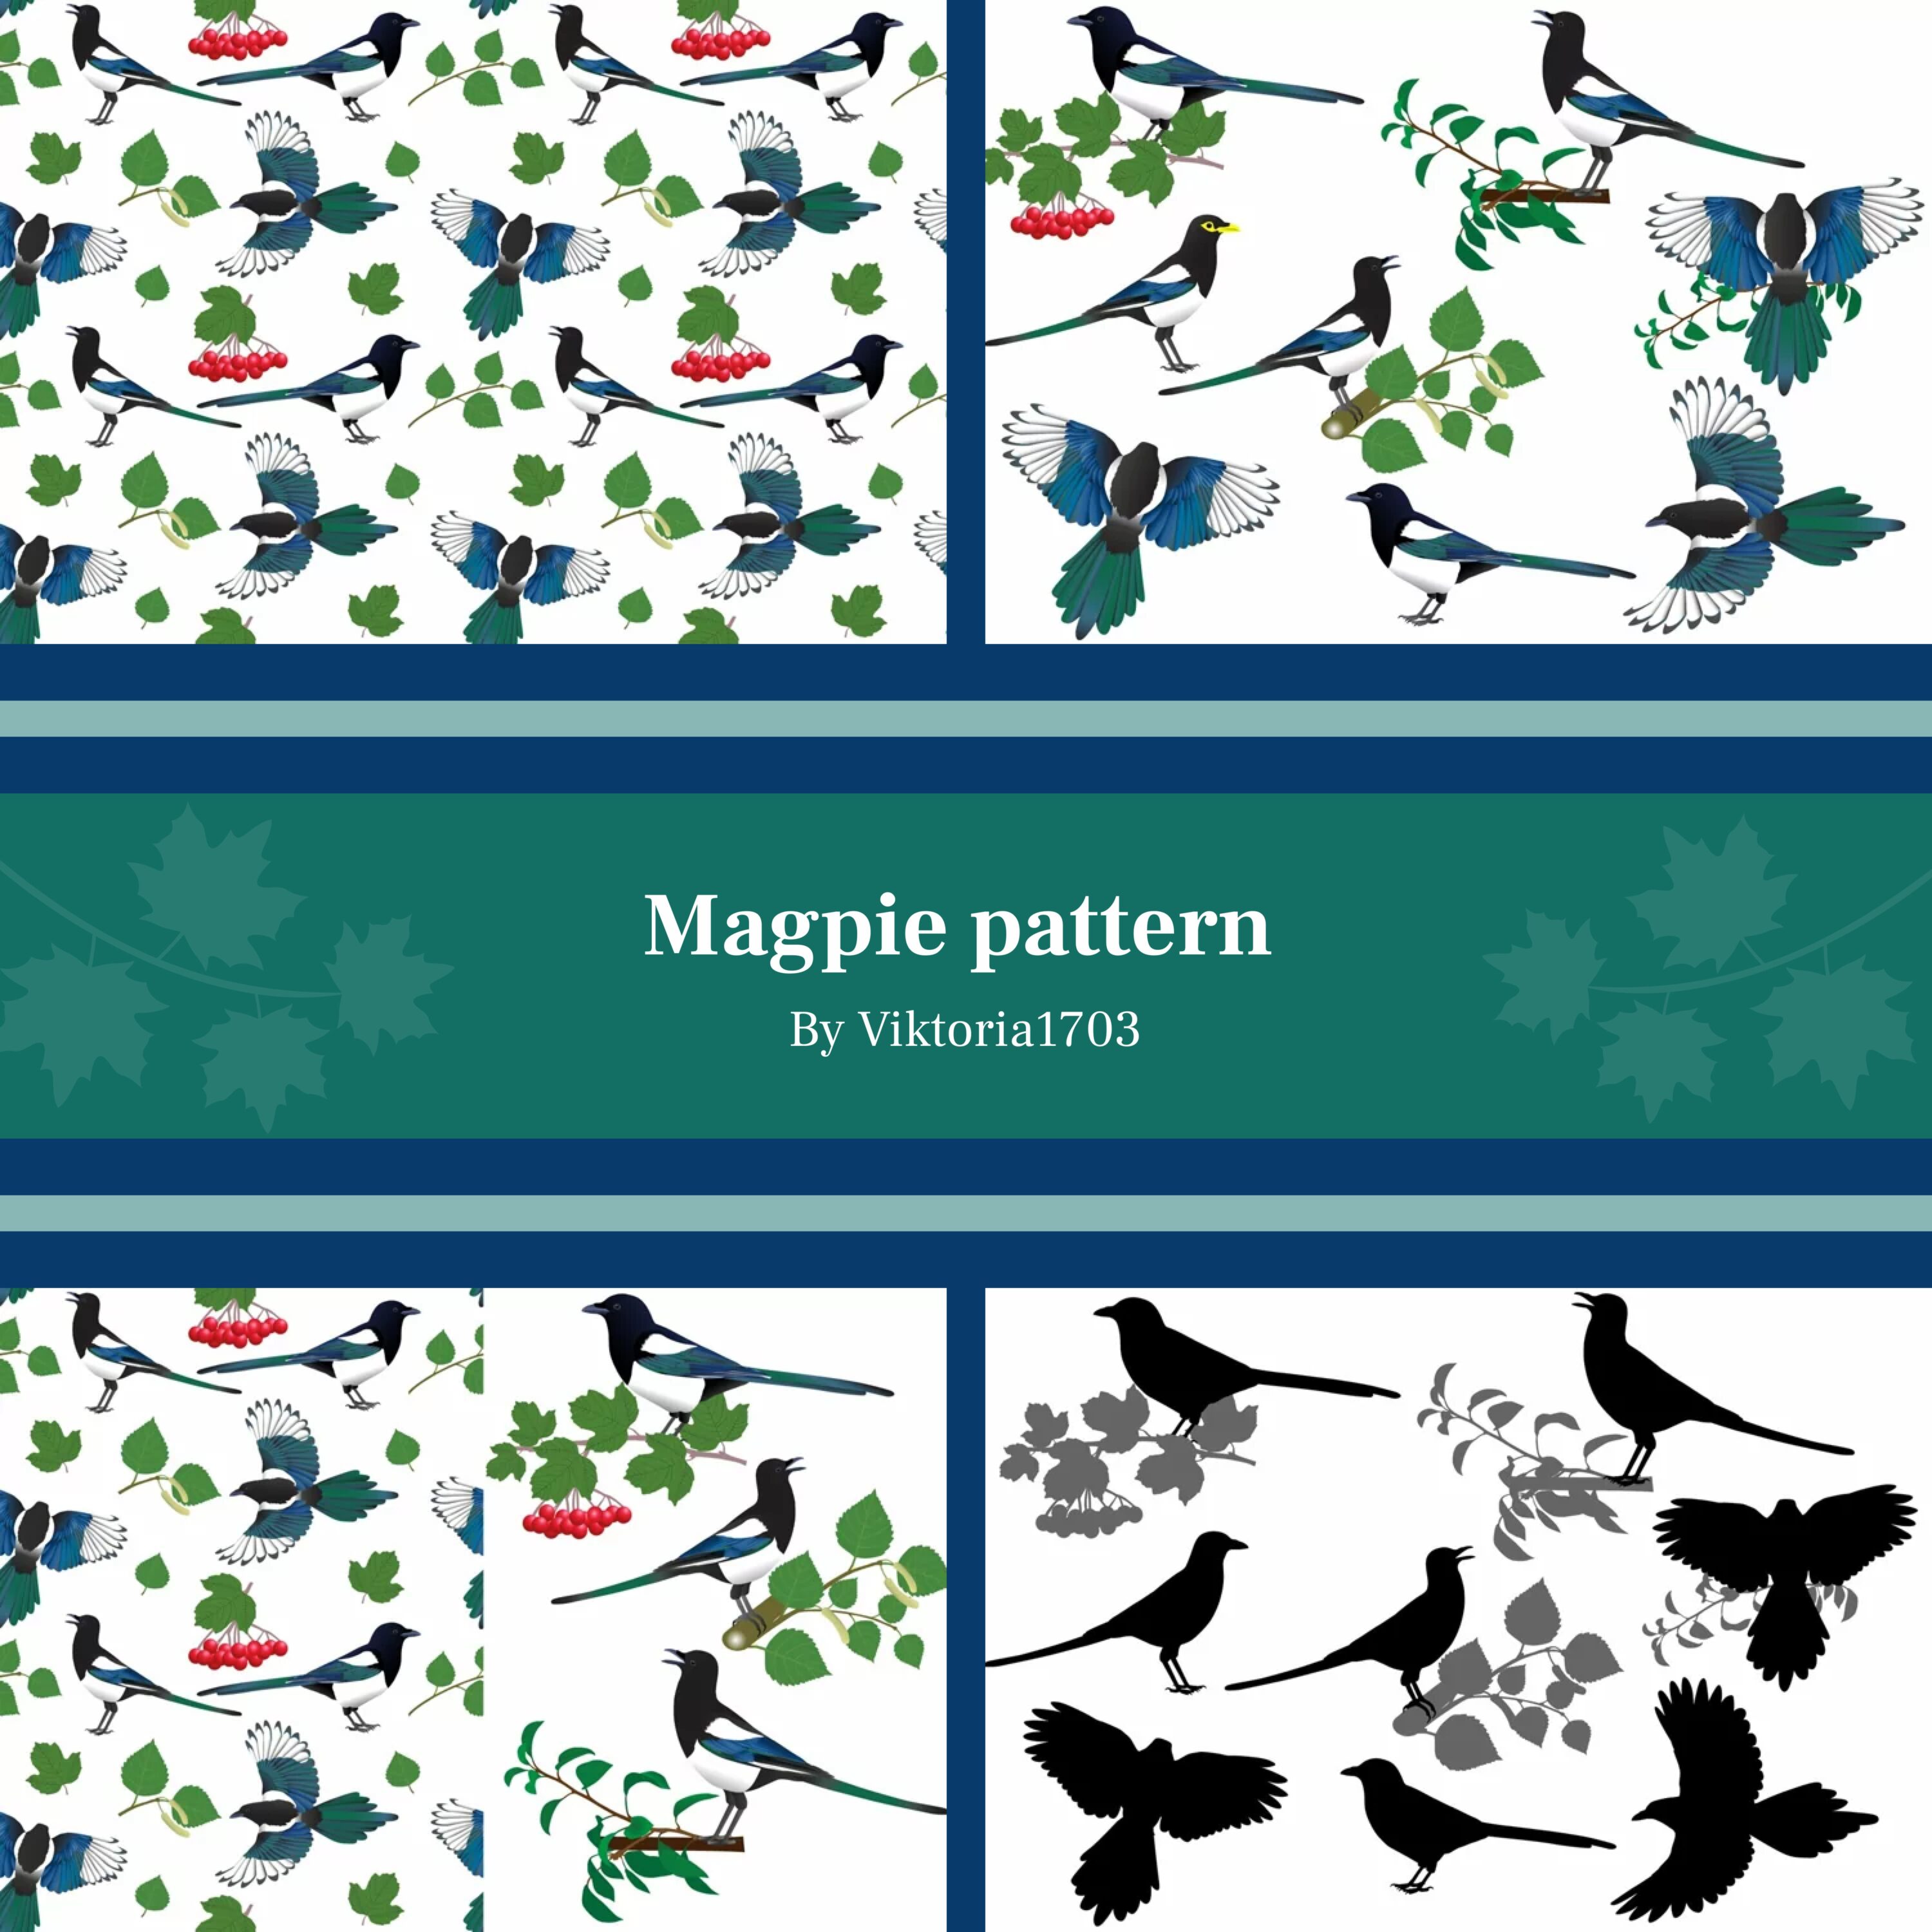 Magpie Pattern cover image.